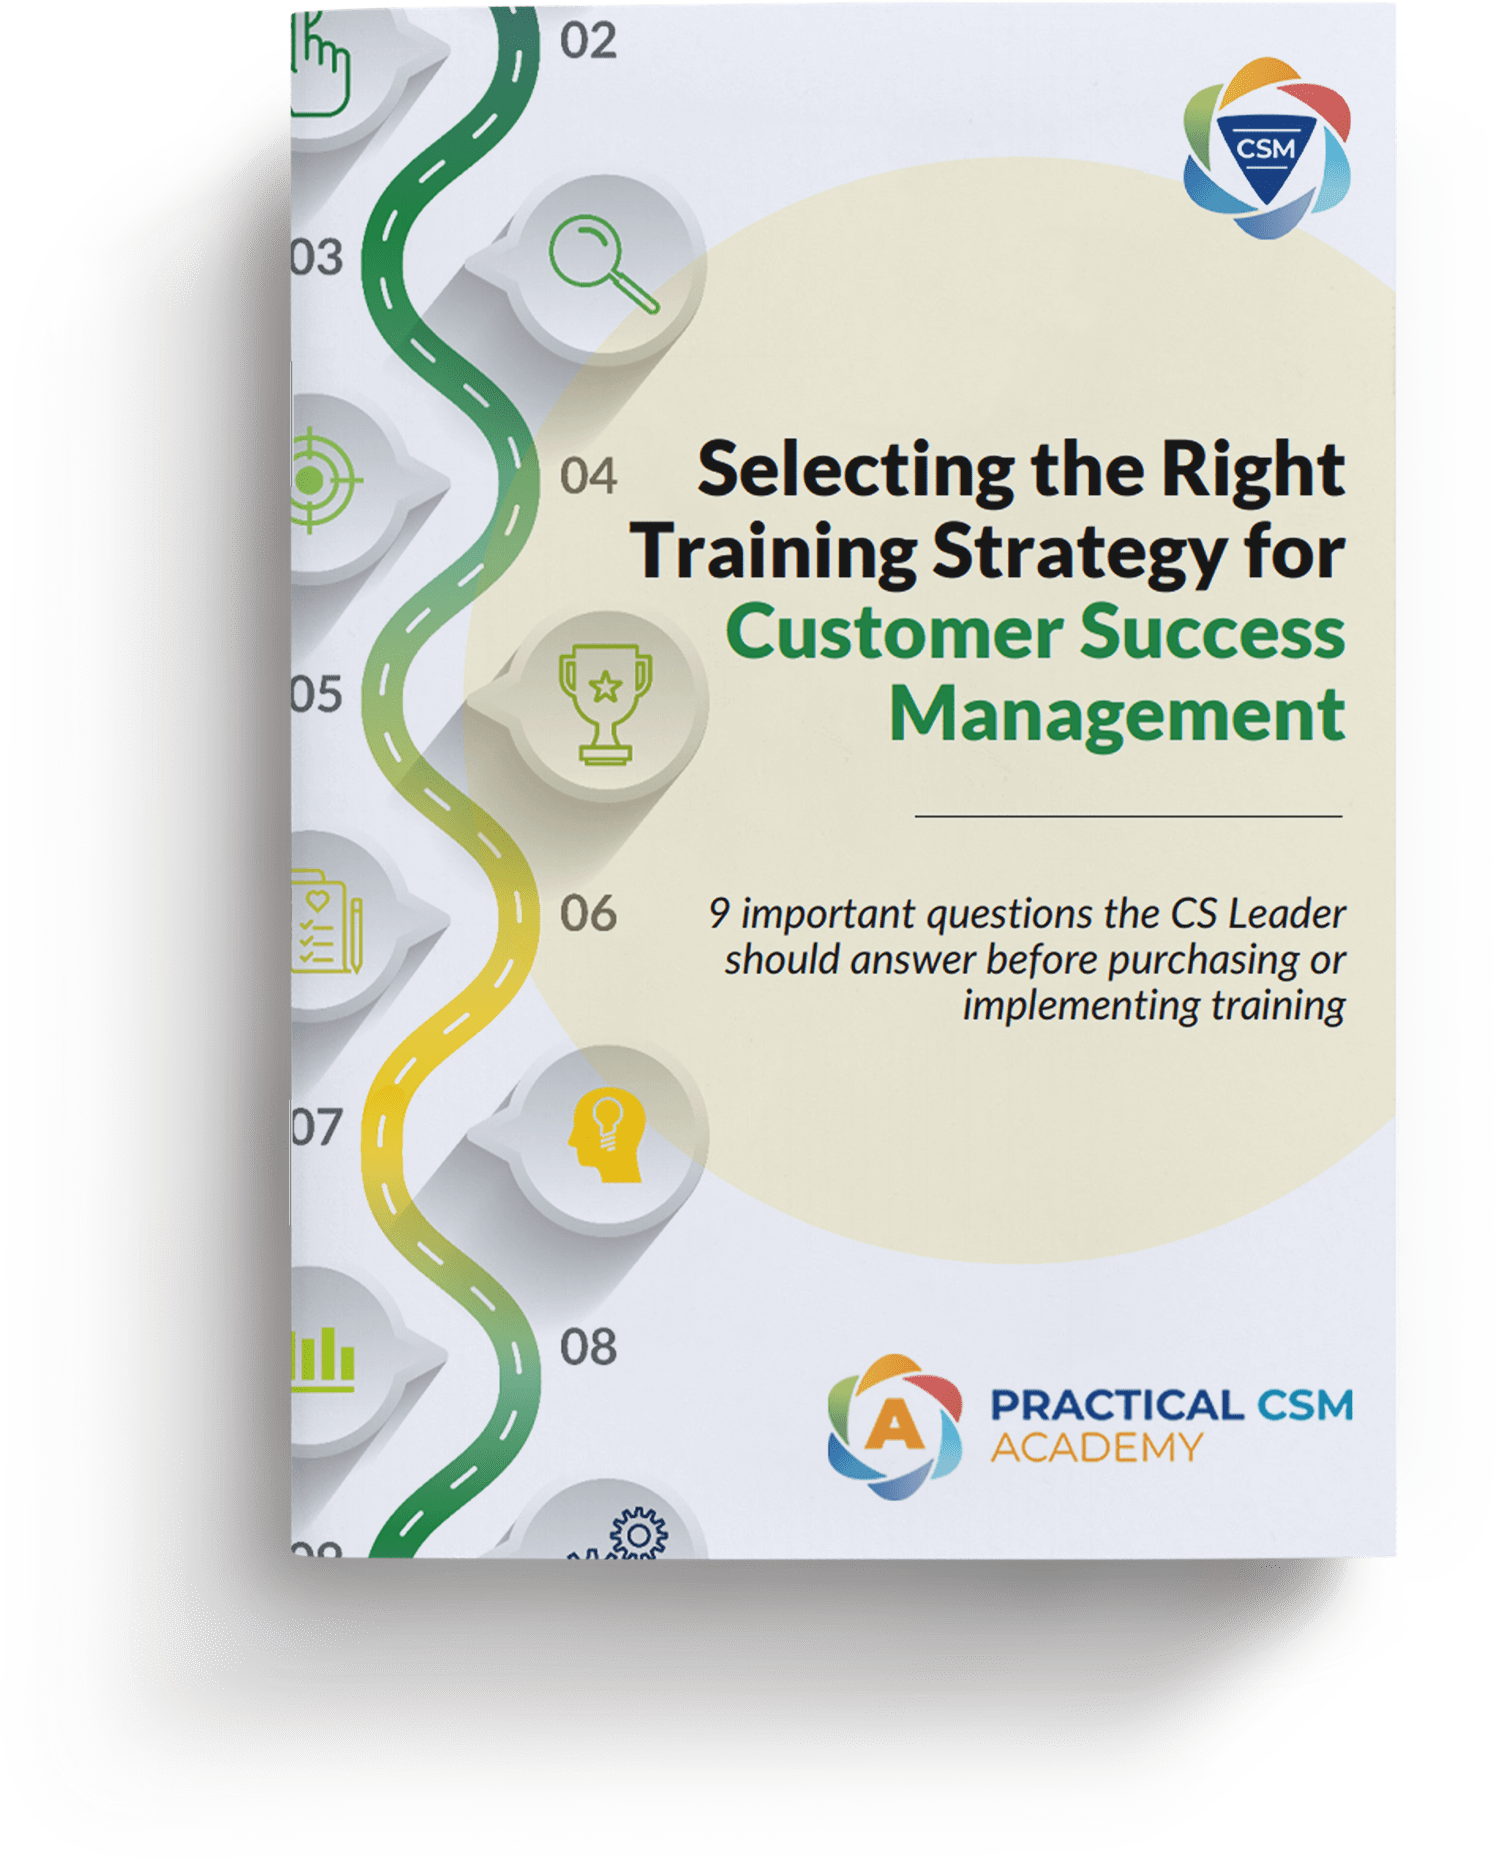 Selecting the Right Training Strategy for Customer Success Management